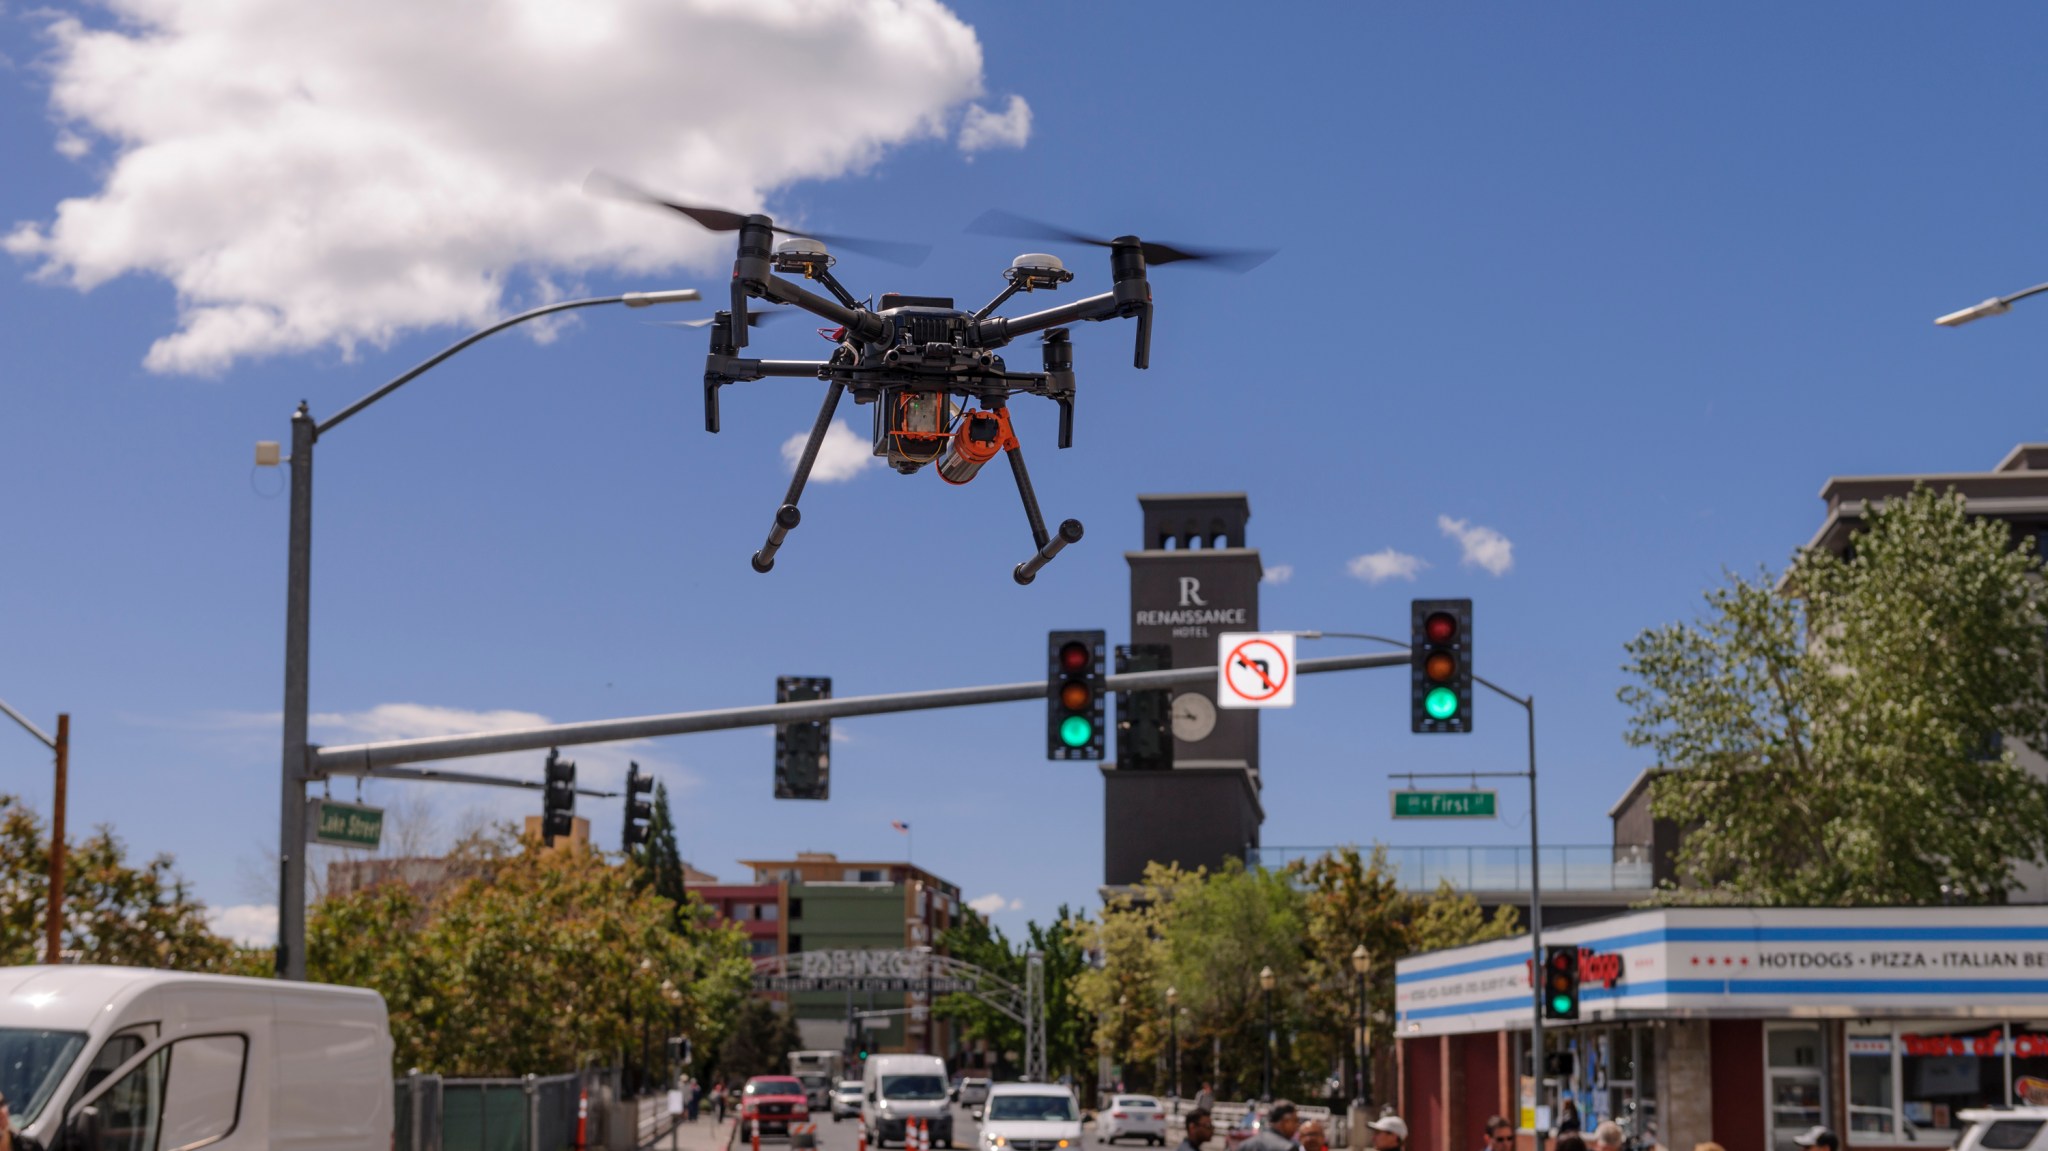 A black drone with four rotors flies above a city street, with traffic lights, buildings, and cars in the background.